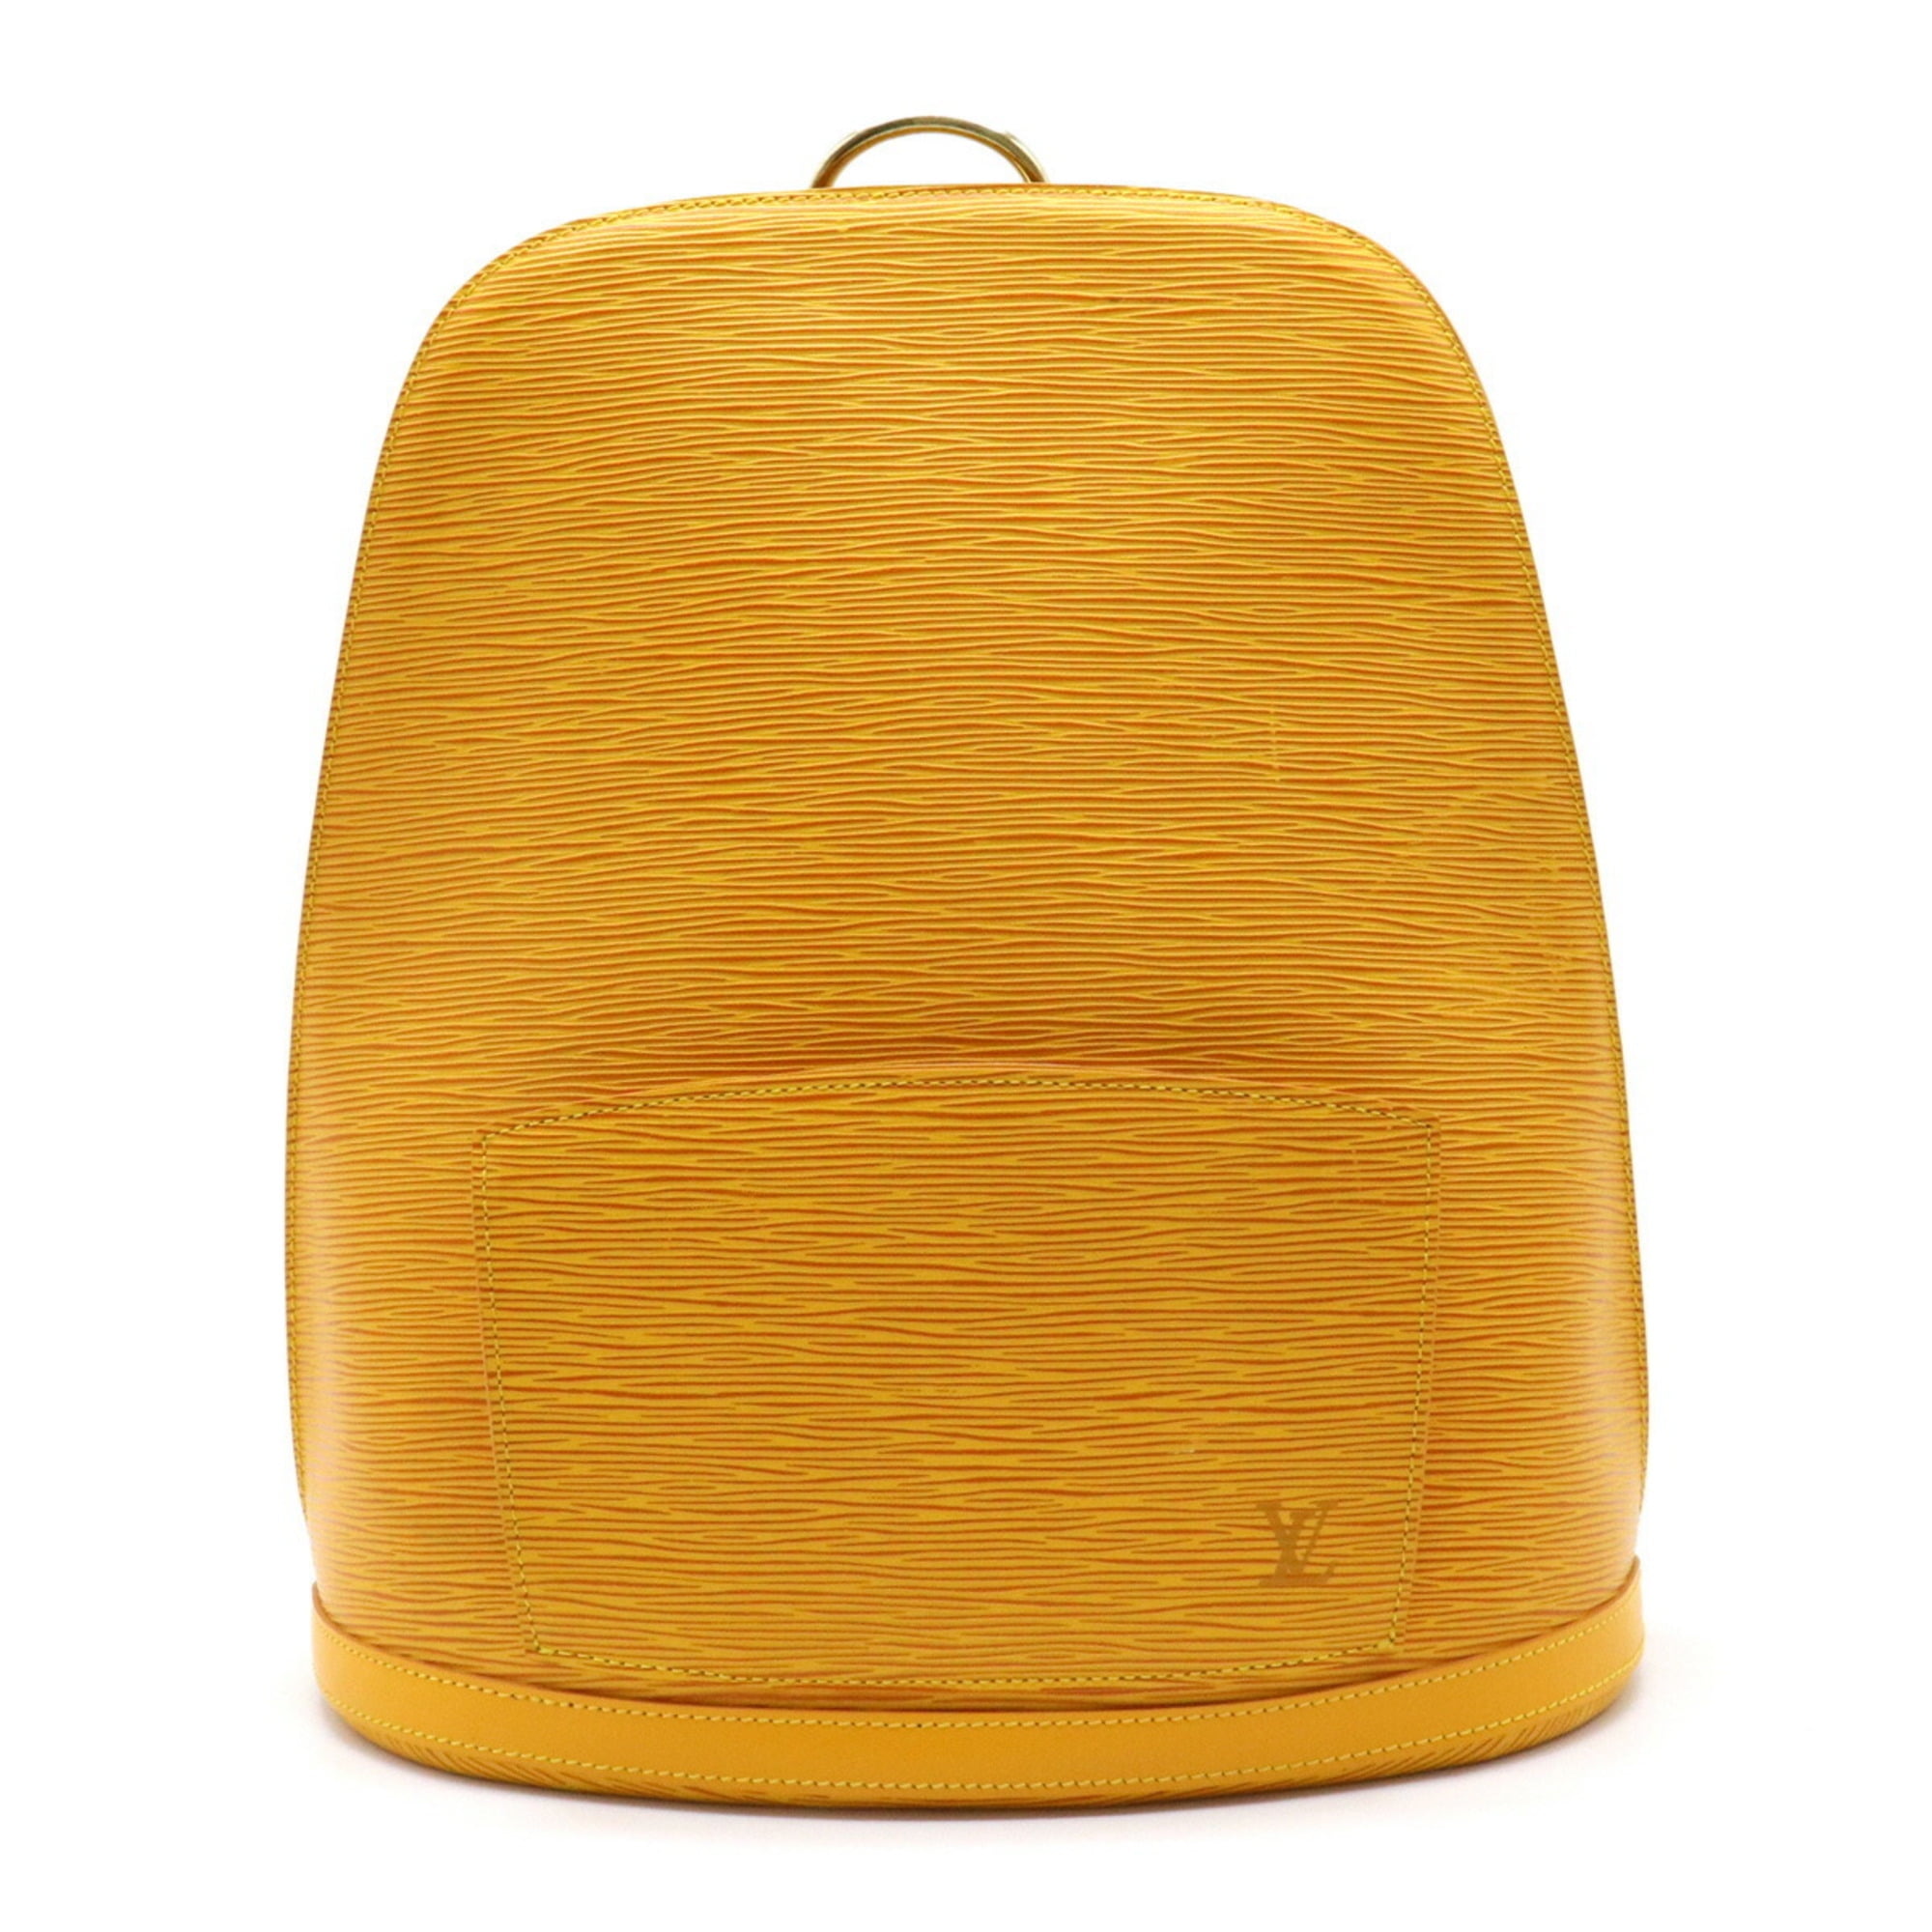 Authenticated Used LOUIS VUITTON Louis Vuitton Epi Coblanc Rucksack Backpack  Leather Tassi Yellow M52299 